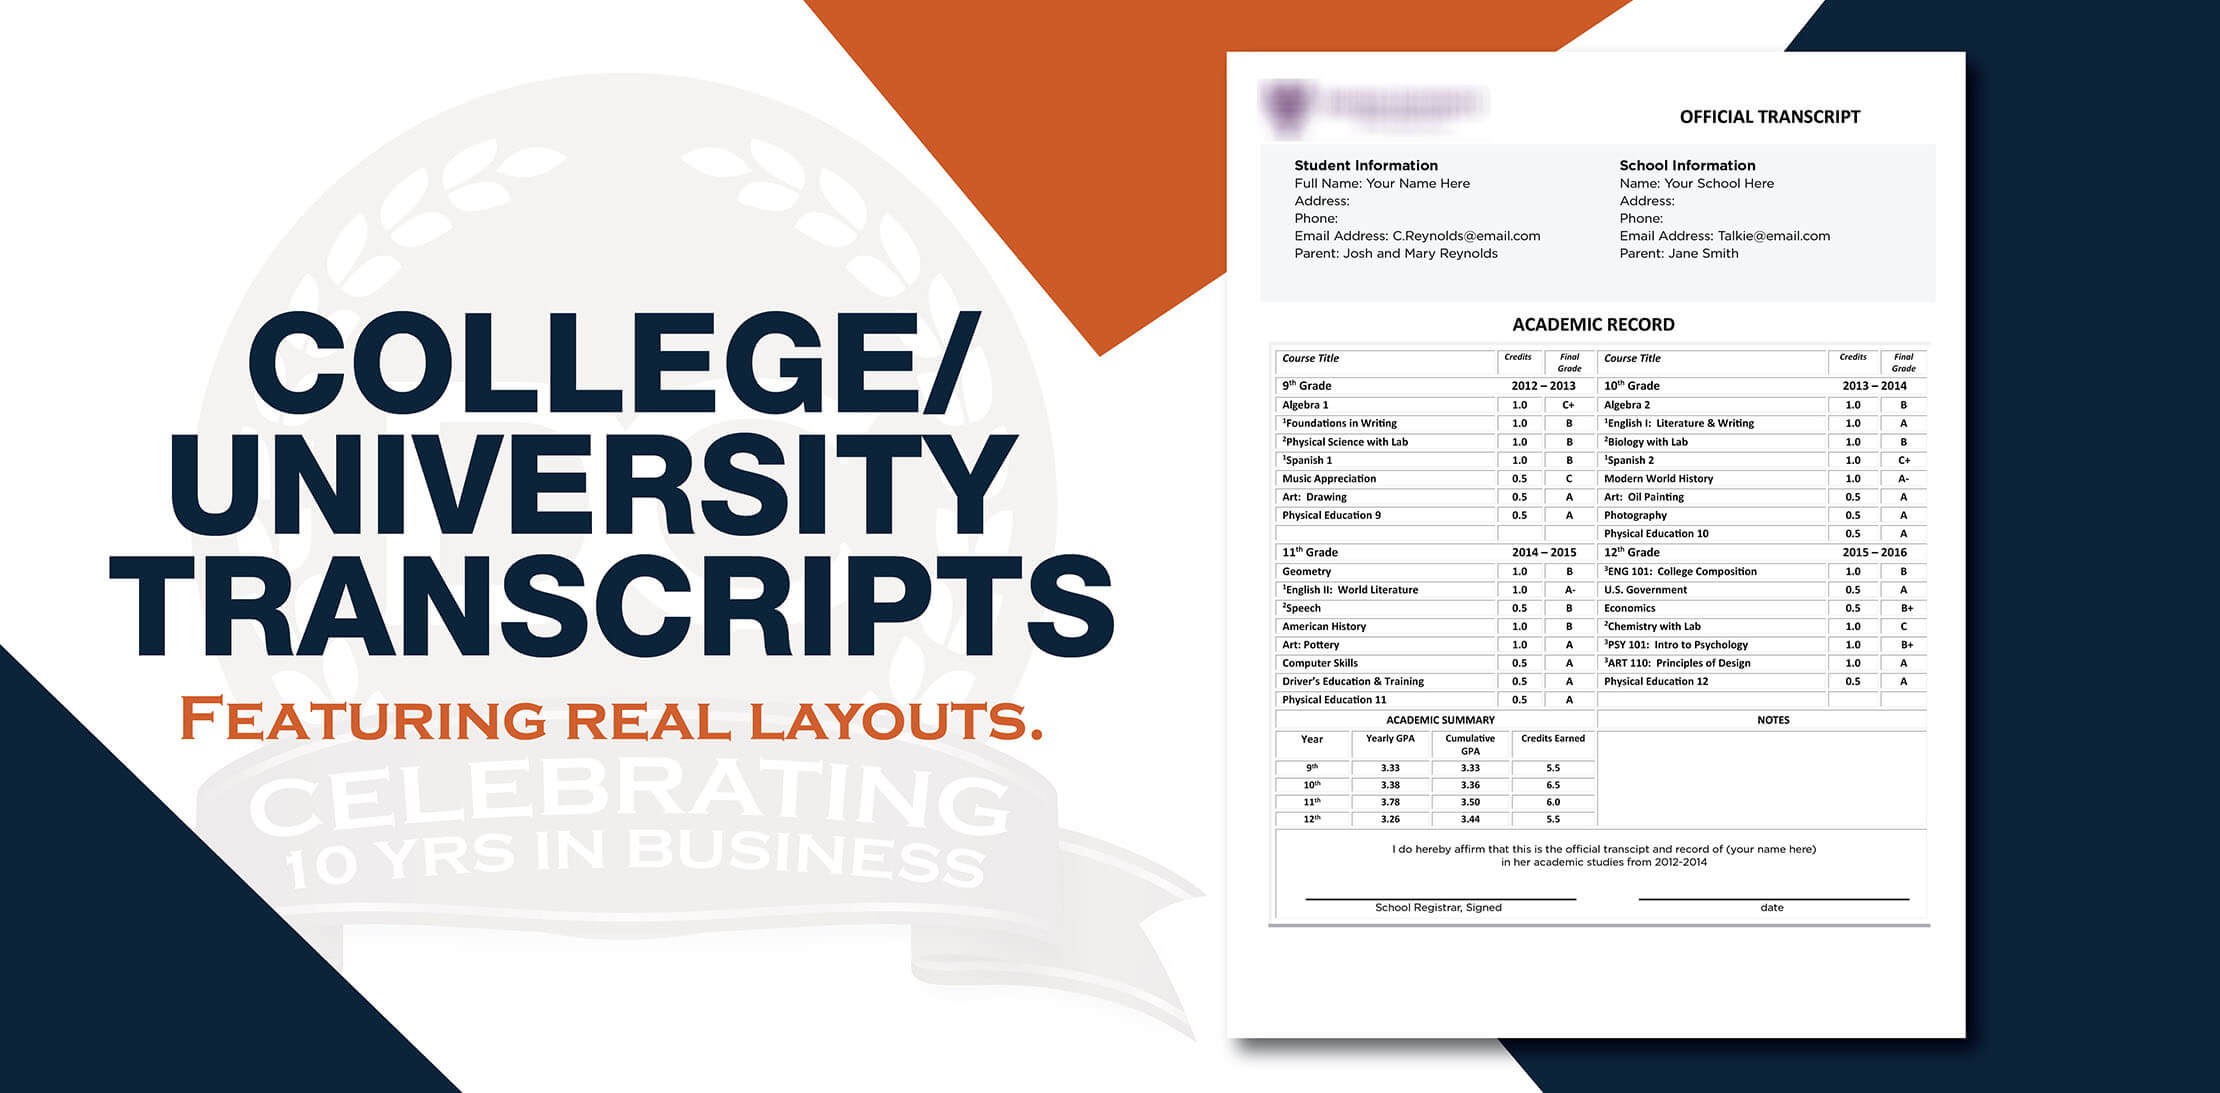 Buy fake college transcripts! Features real university coursework and precise scores on real paper! Amazing quality! Free shipping and money-back guarantee!
